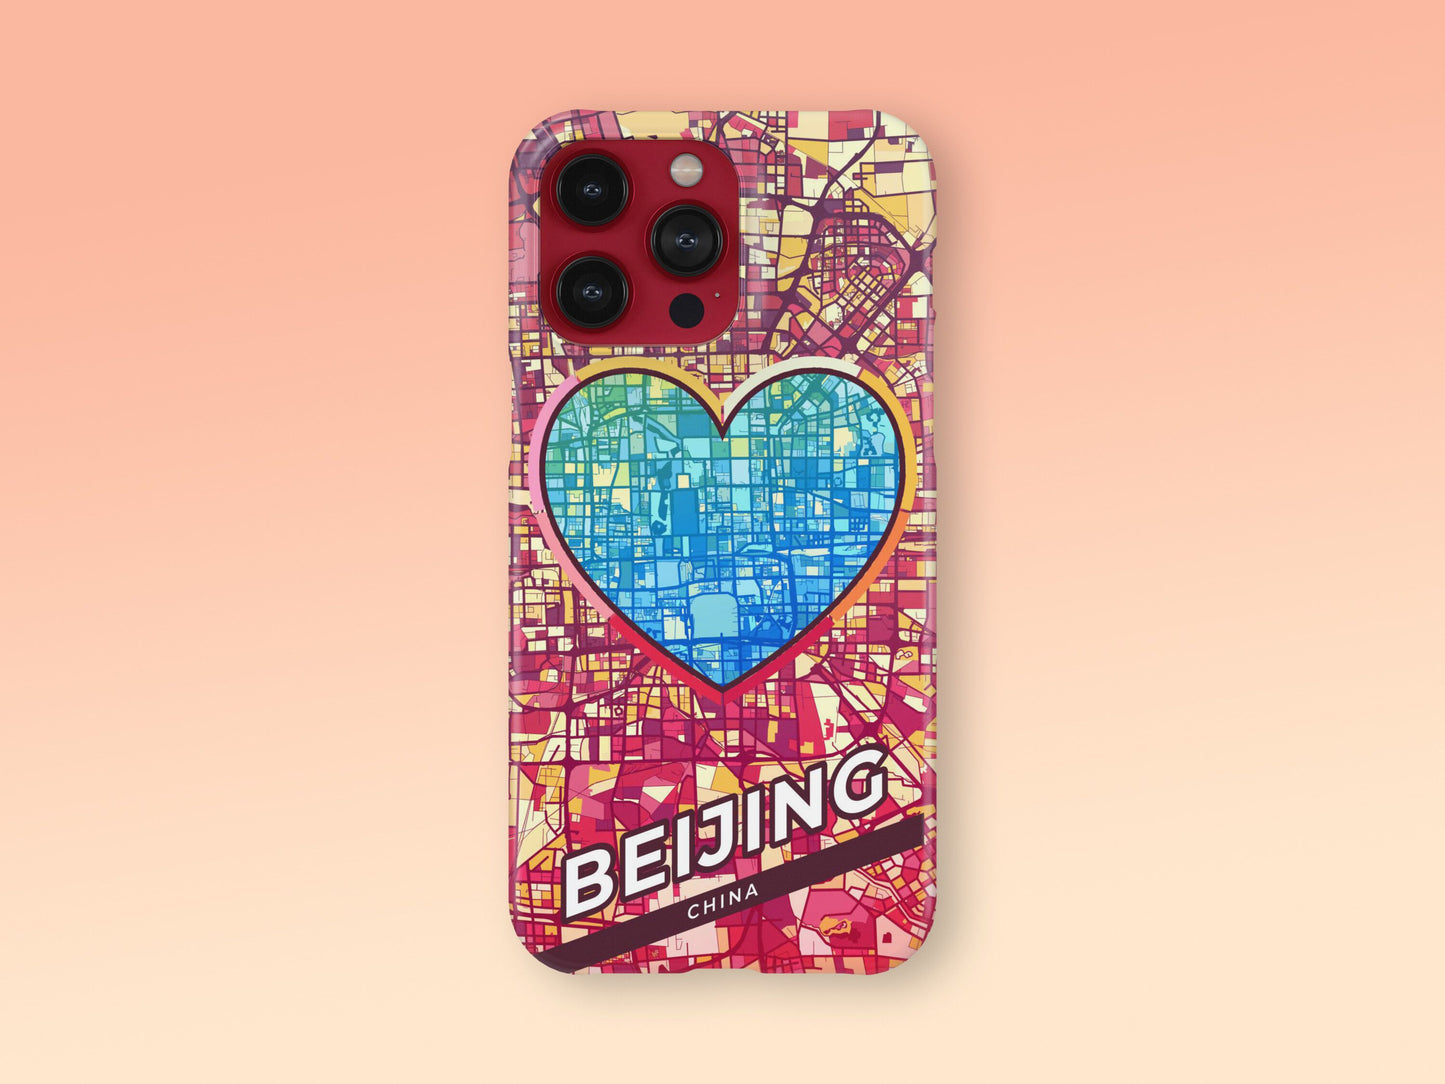 Beijing China slim phone case with colorful icon. Birthday, wedding or housewarming gift. Couple match cases. 2